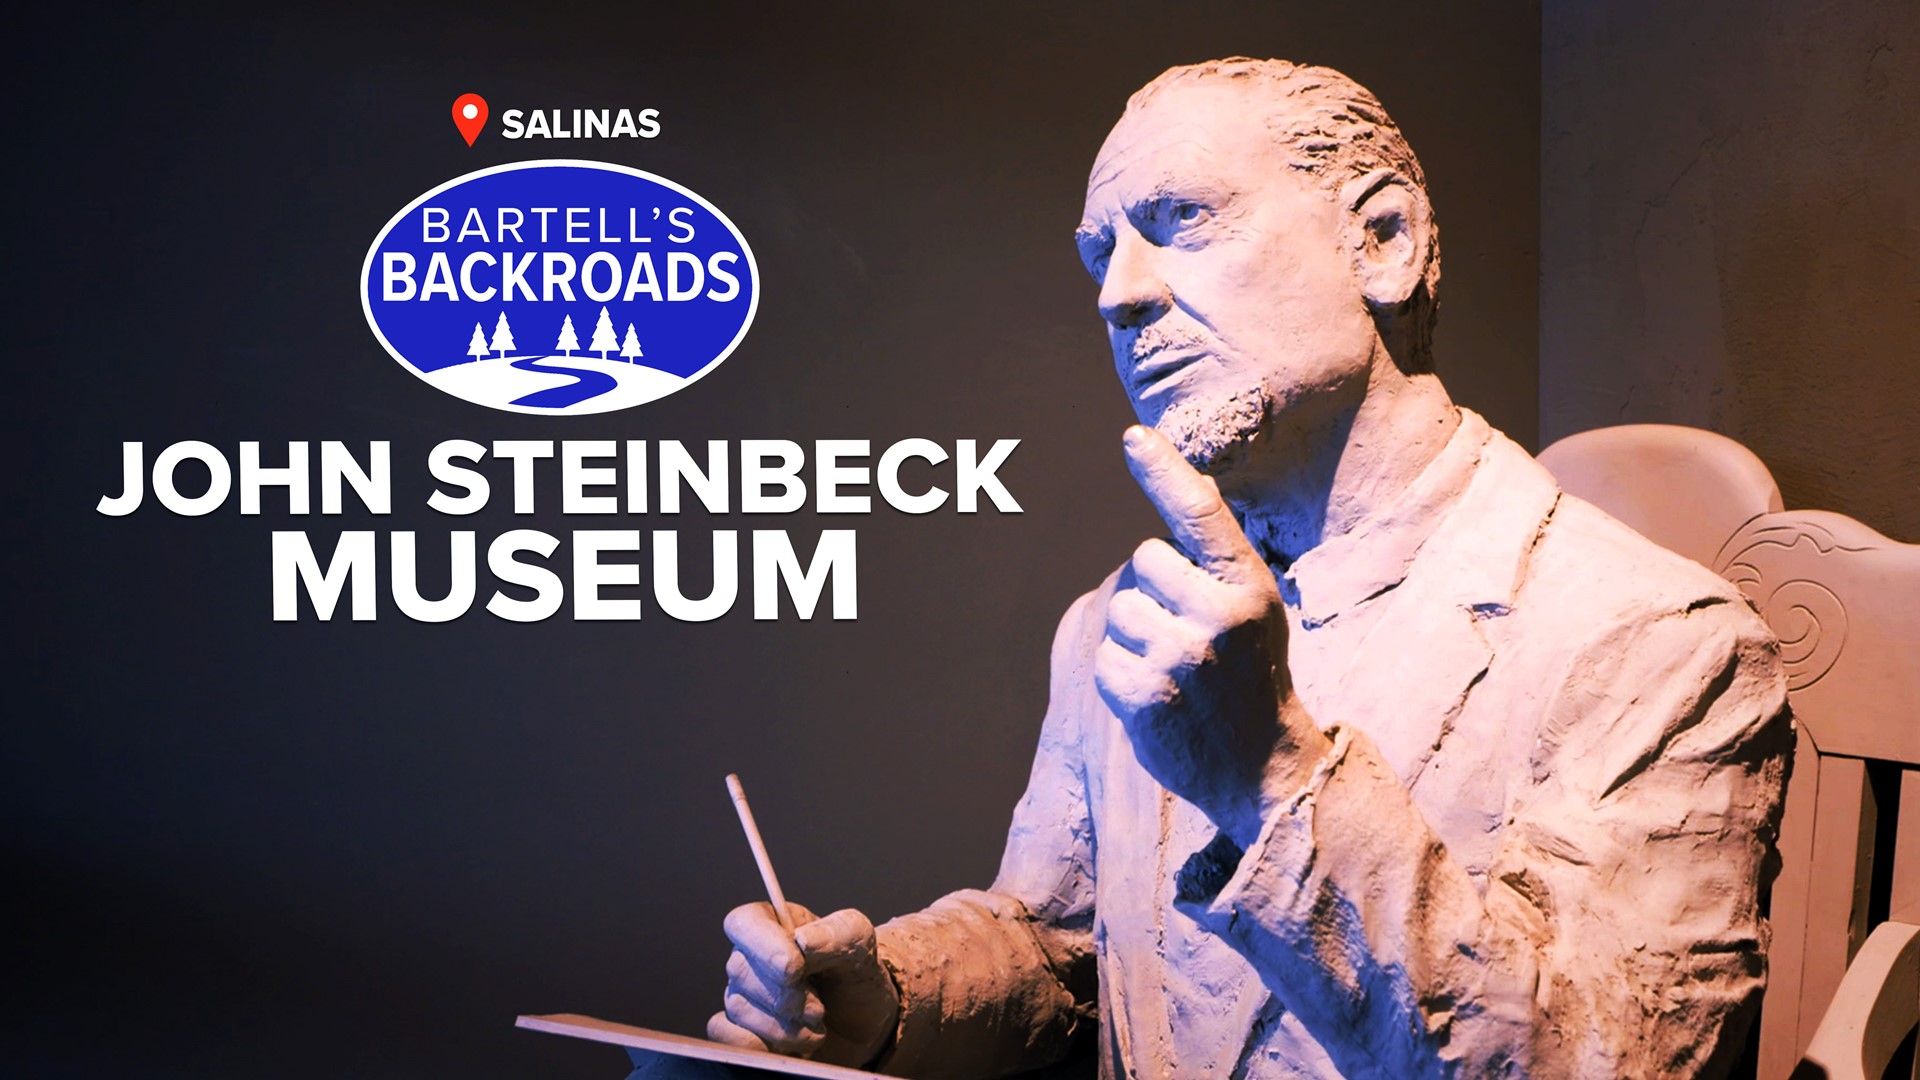 Visit the National Steinbeck Museum in Salinas and learn what inspired some of John Steinbeck's most prominent works.